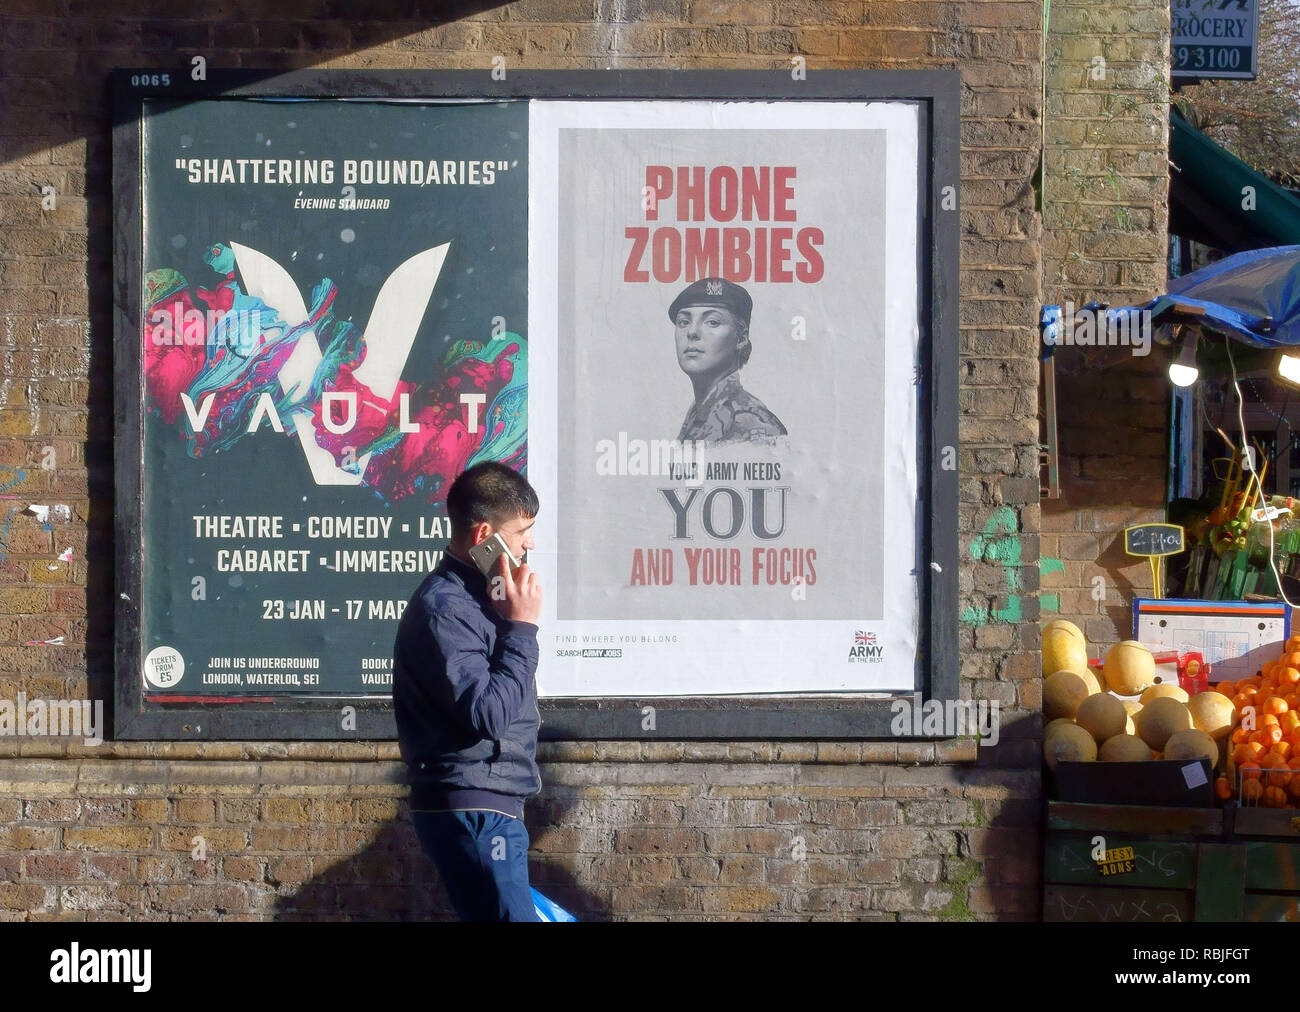 Army recruitment poster aimed at 'phone zombies', Peckham, London Stock Photo